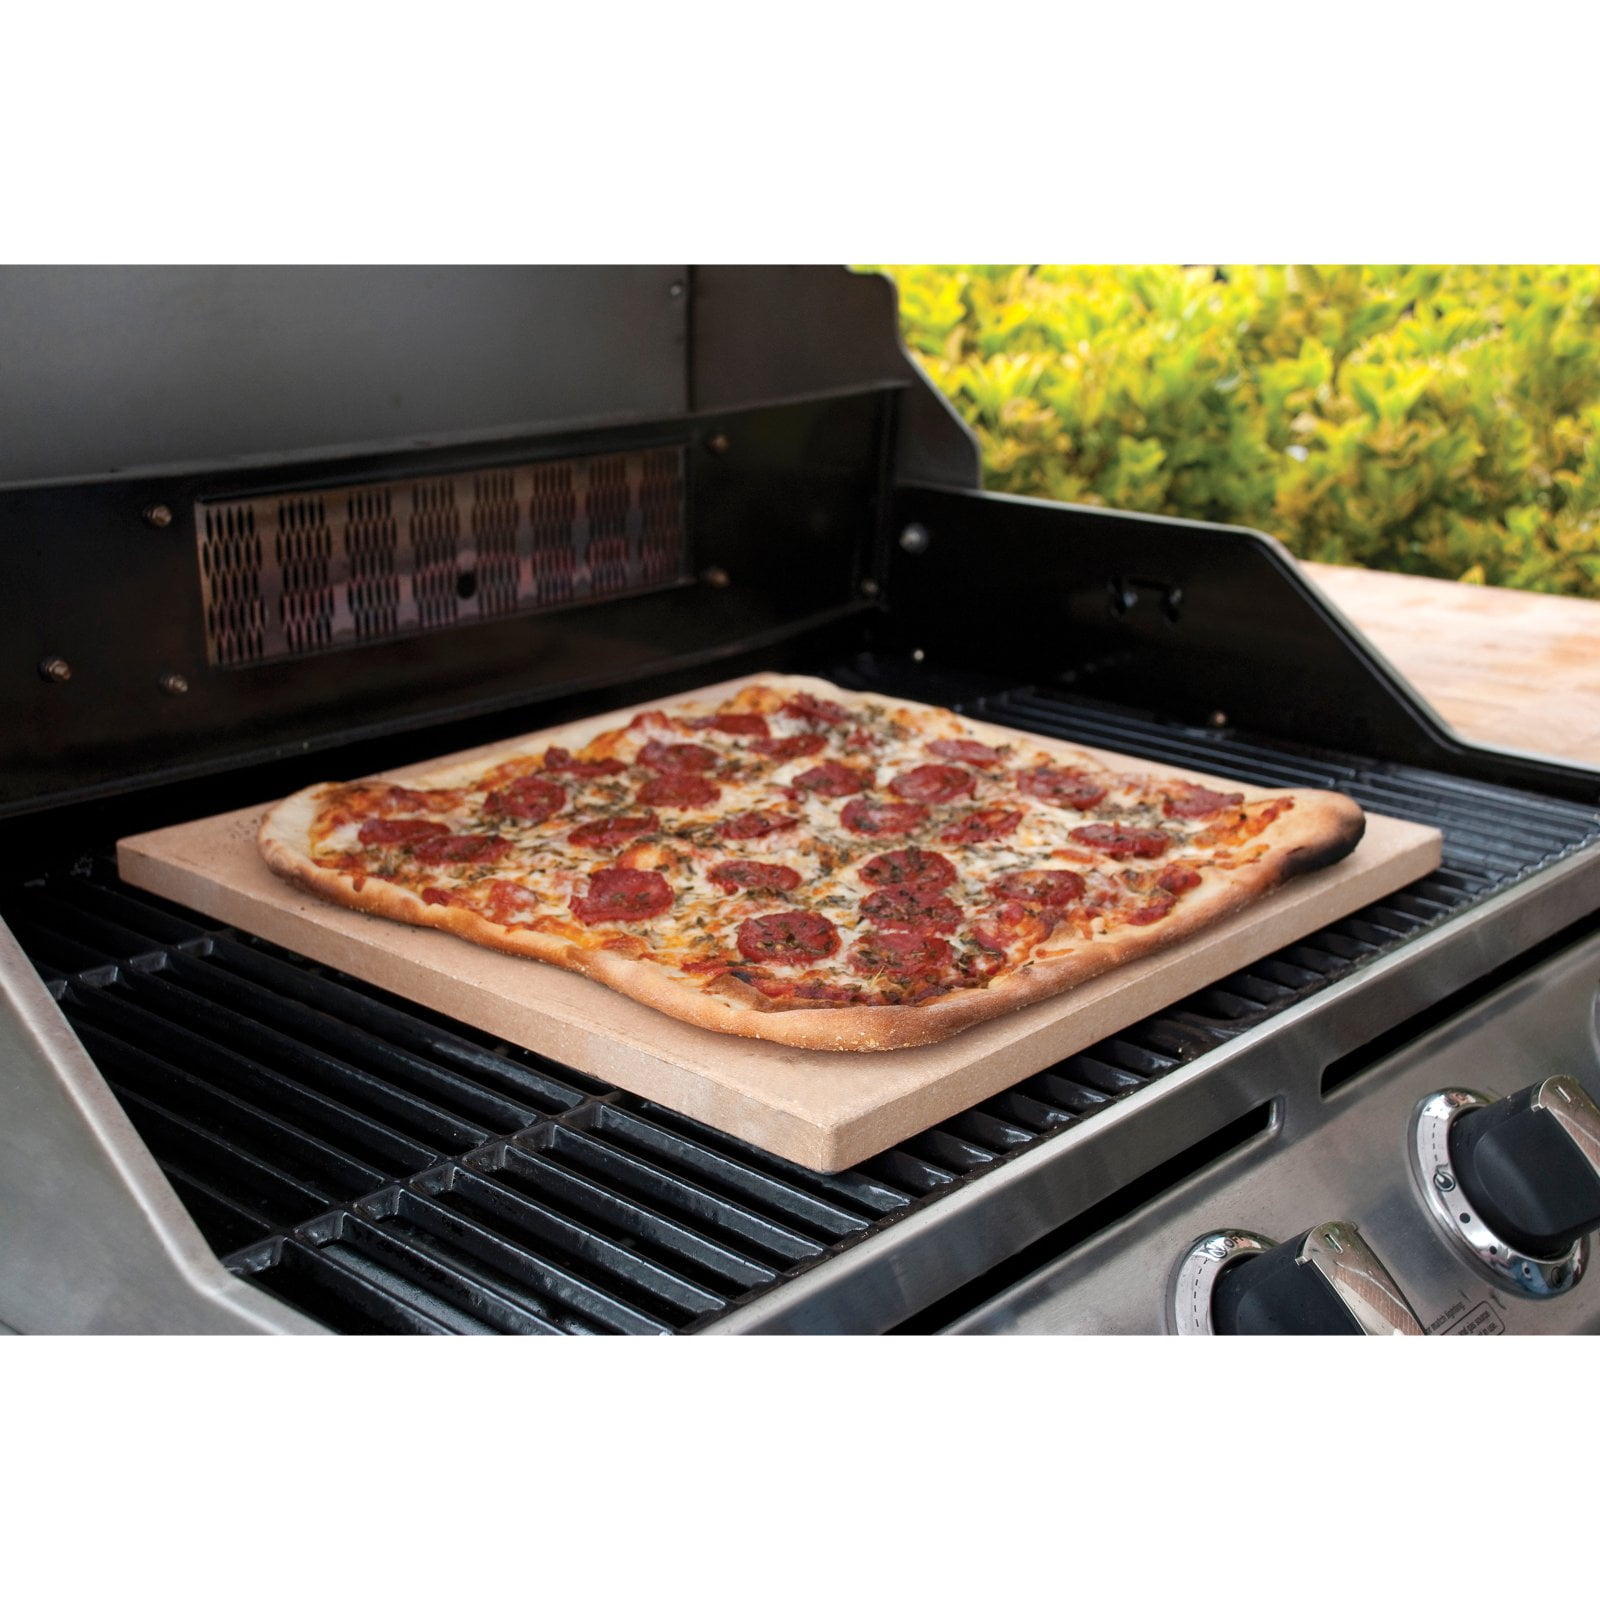 The Ultimate 14" x 16" Rectangular Pizza Stone for Oven & Grill New 